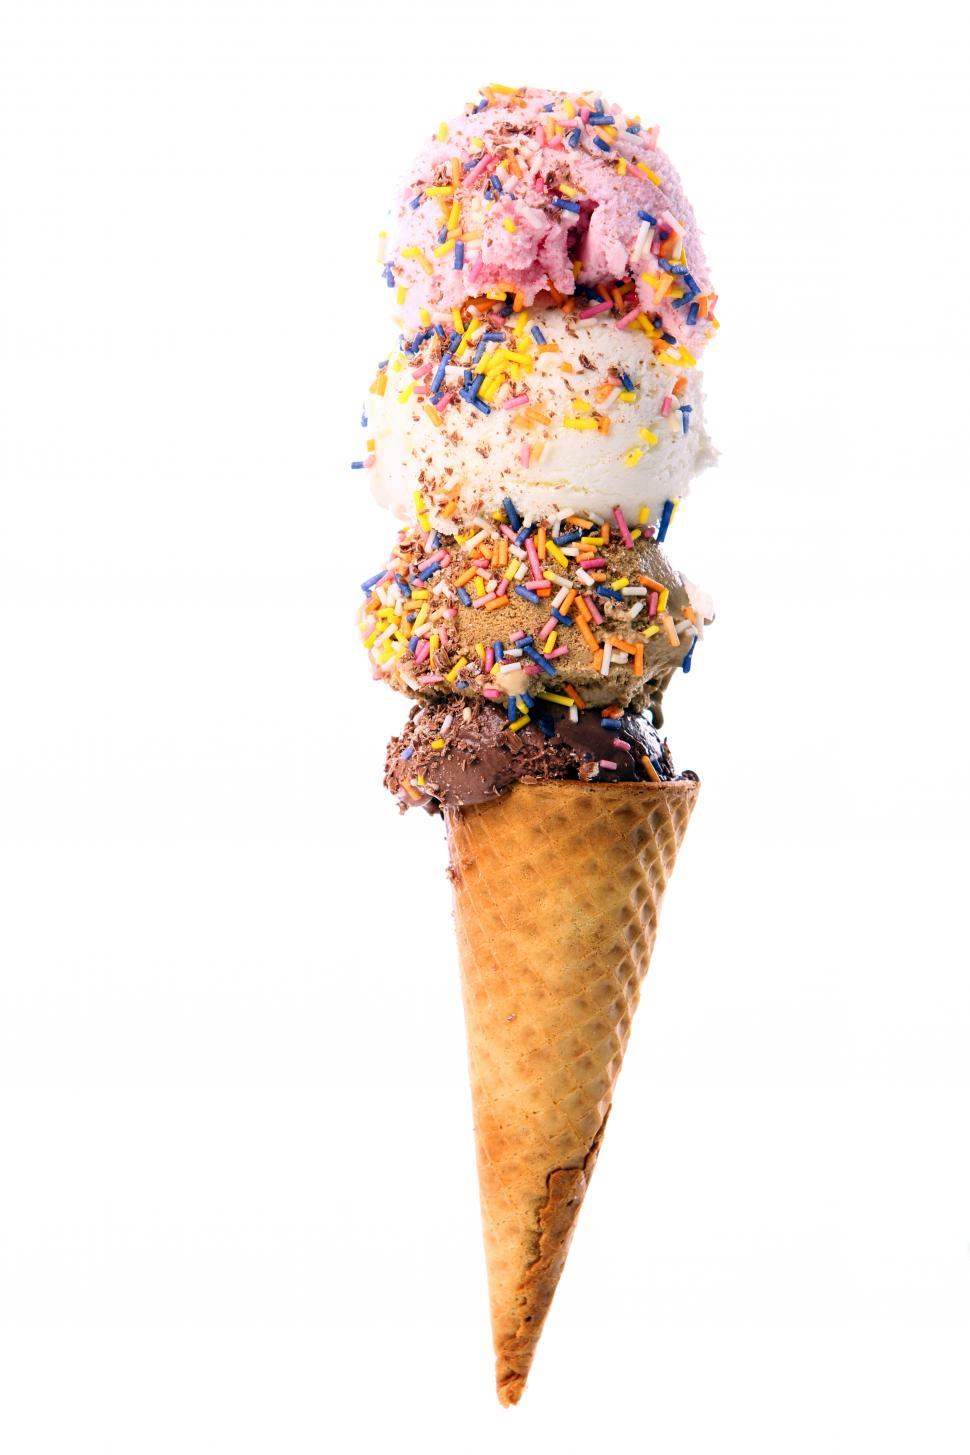 Free Image of Four scoops of ice cream with sprinkles 